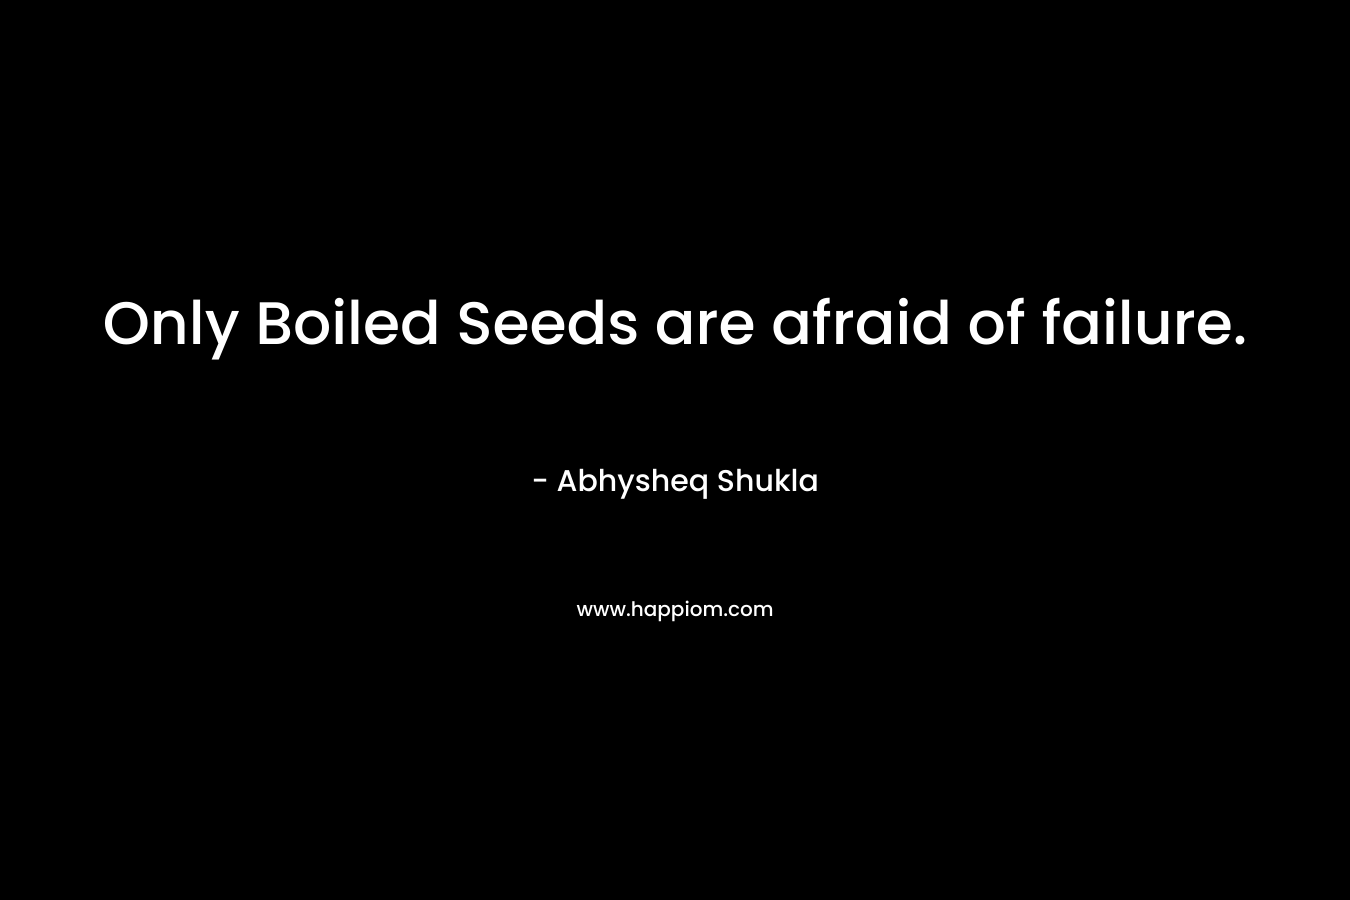 Only Boiled Seeds are afraid of failure. – Abhysheq Shukla